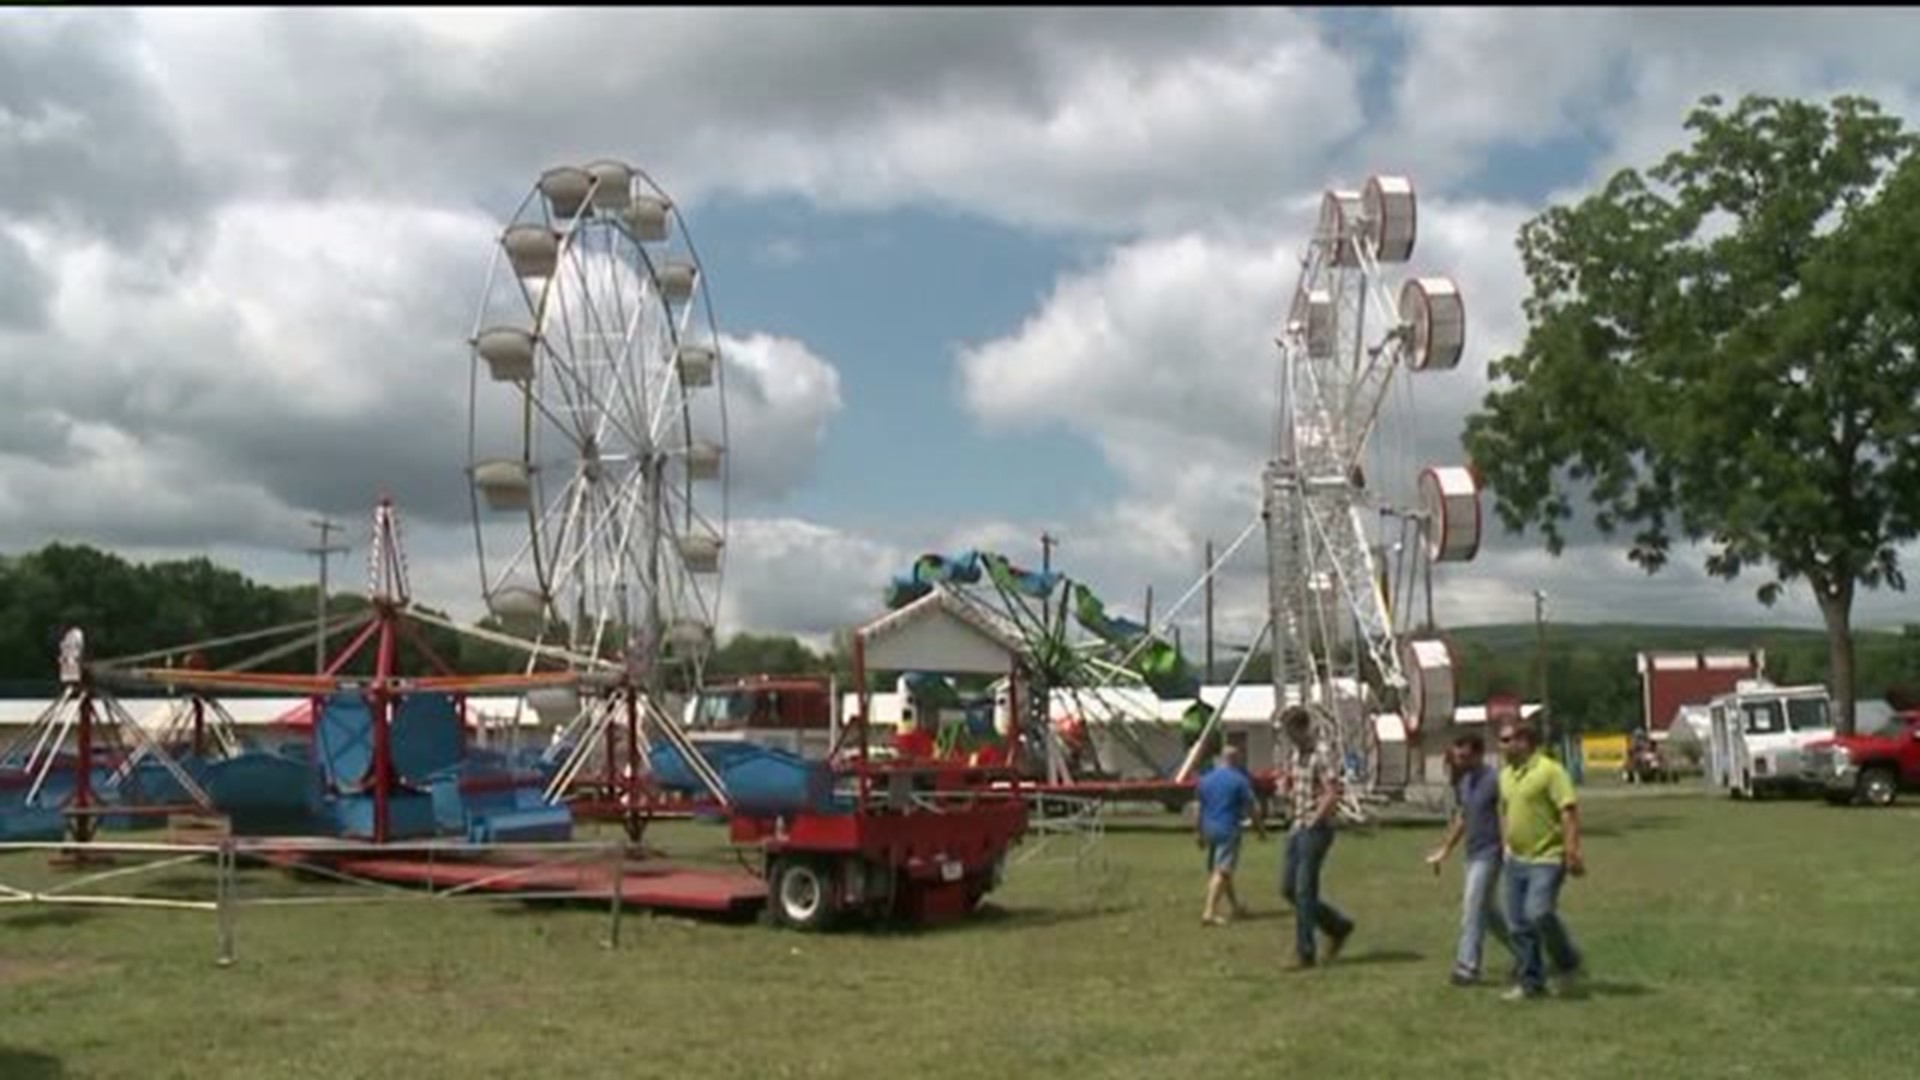 West End Fair Kicks Off in Union County